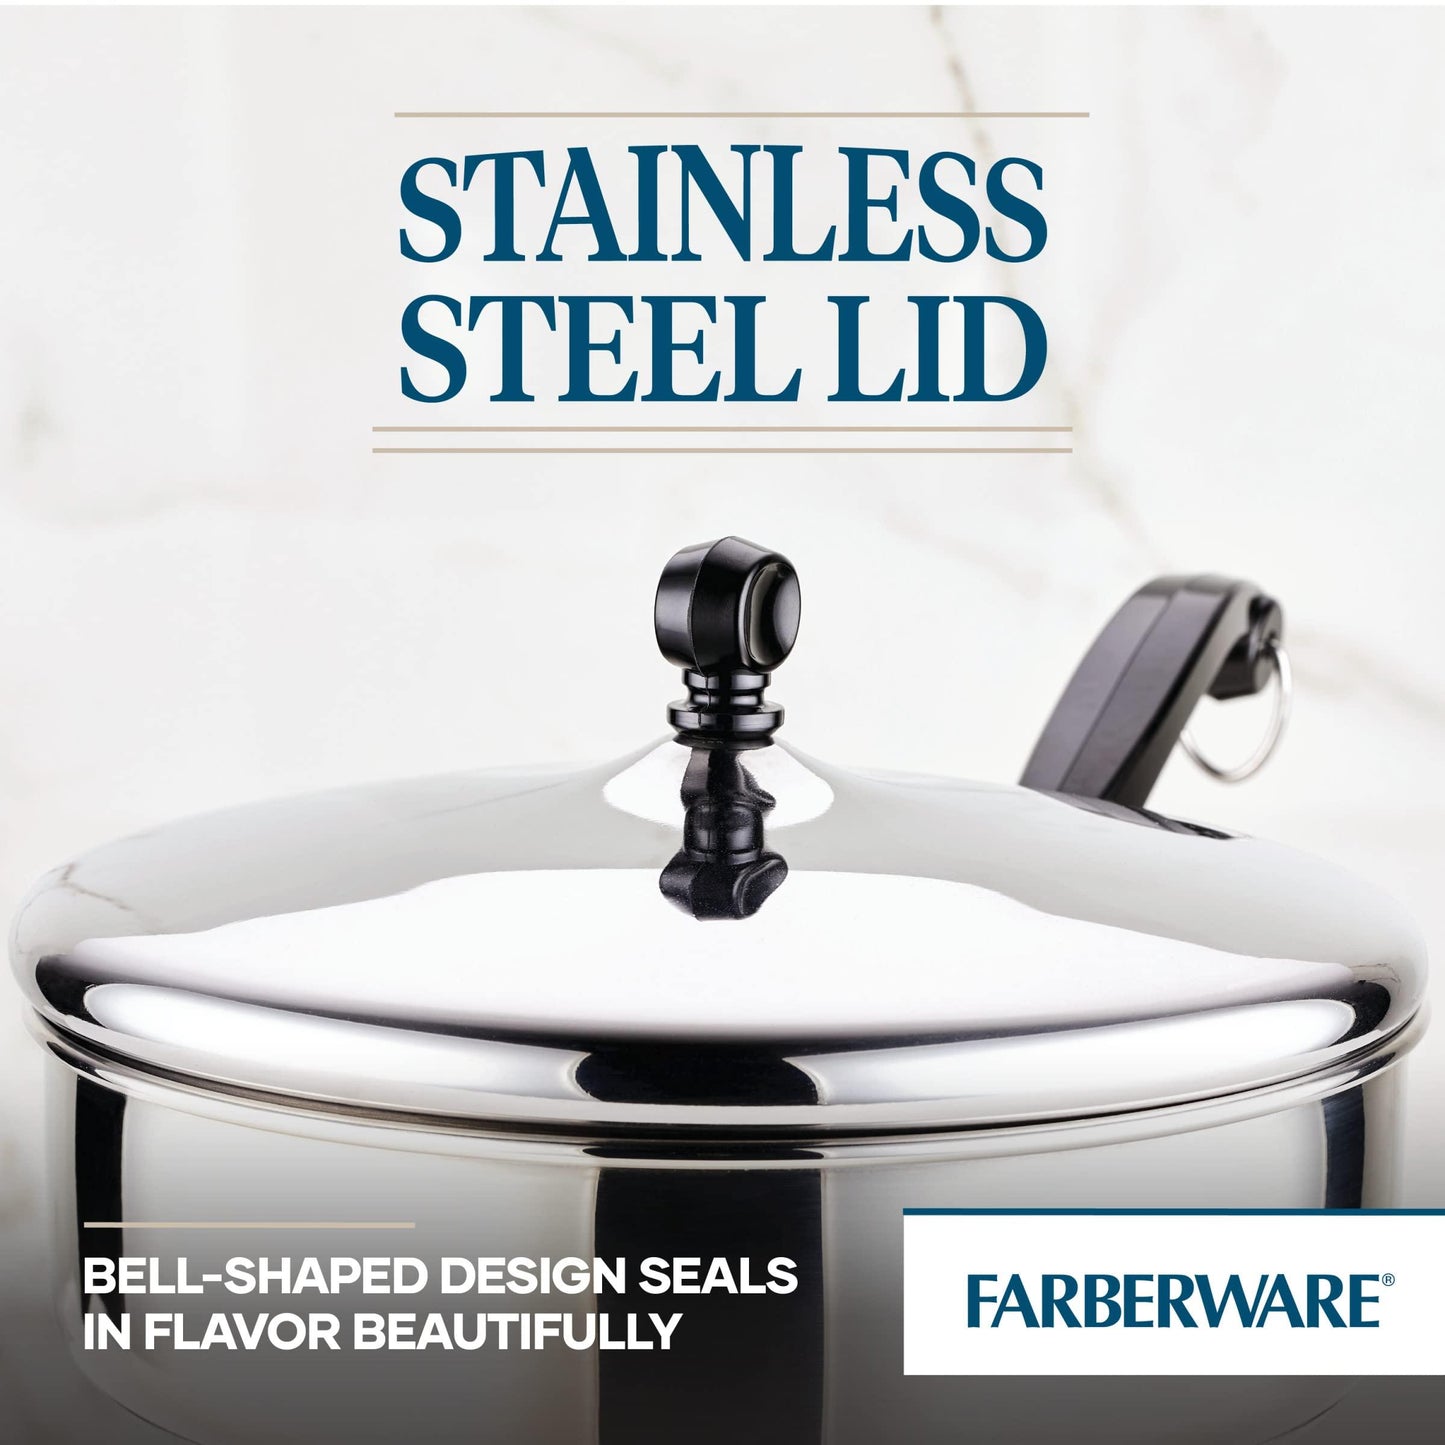 Farberware Classic Stainless Steel Fry Lid, Saute Pan (2.75 Quart), Silver - CookCave